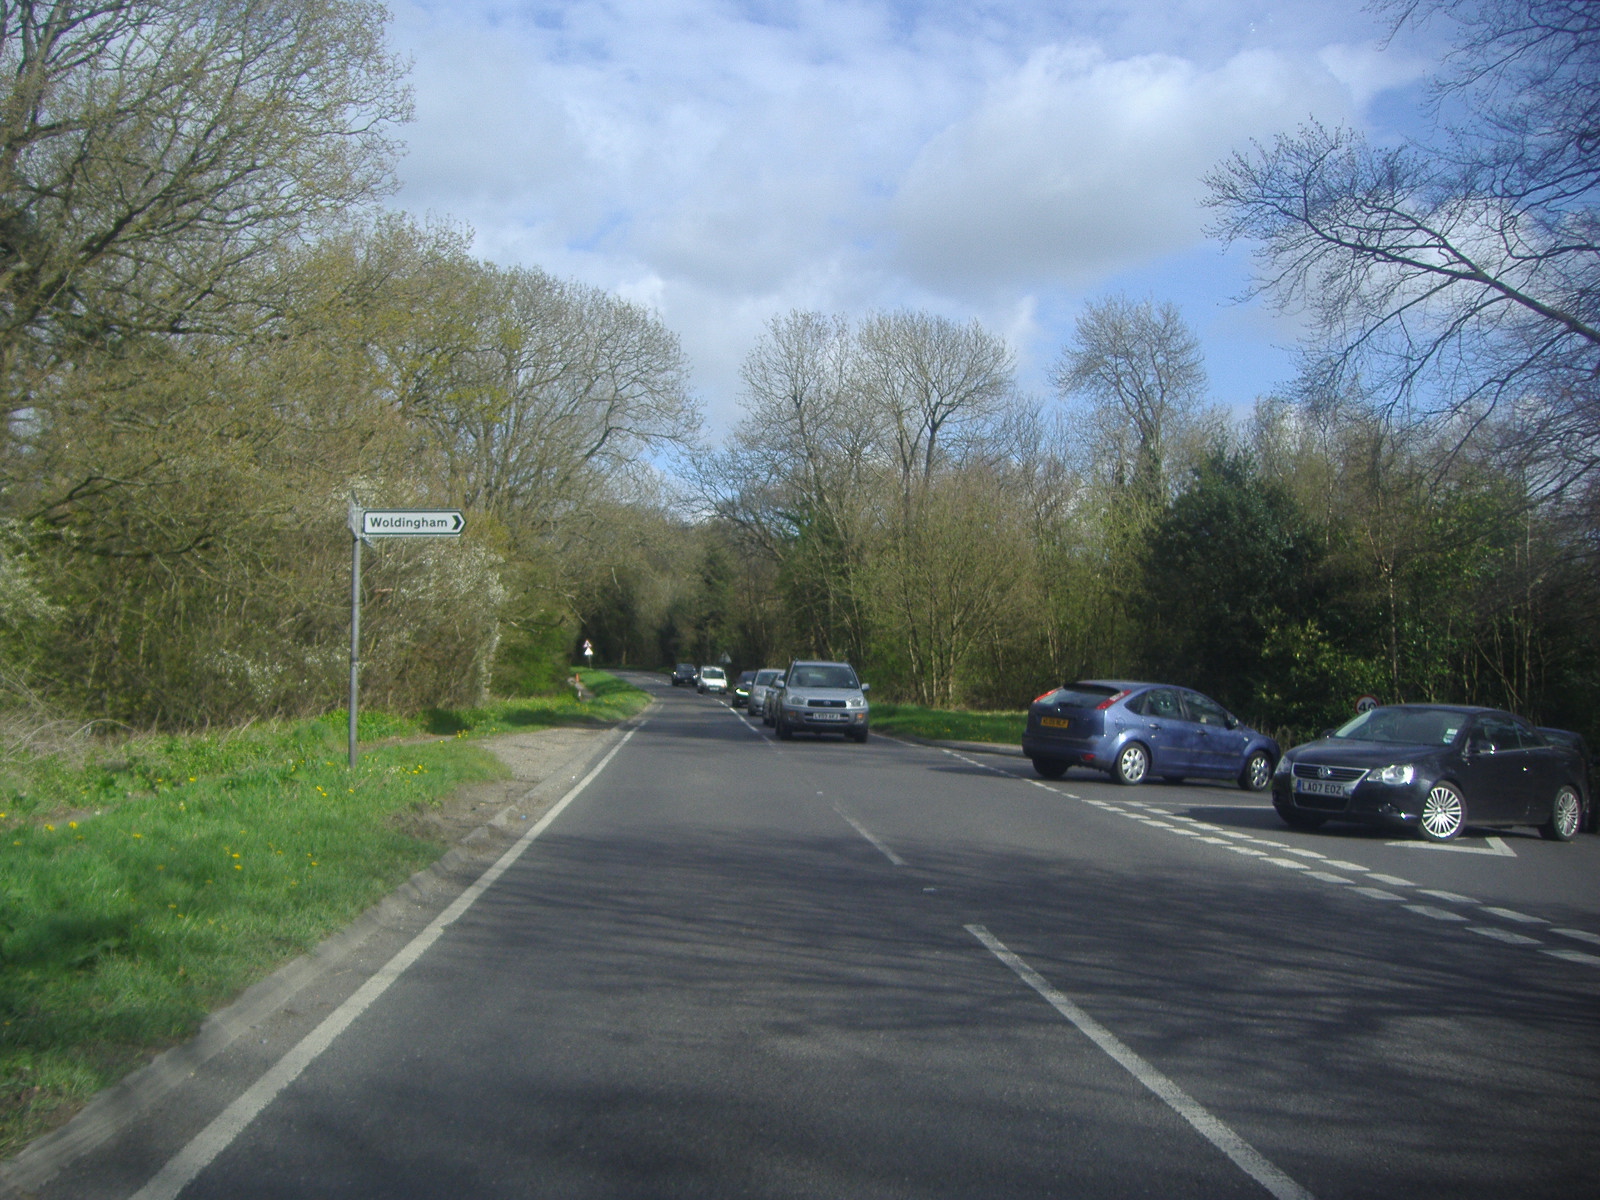 an image of a country road with some cars parked on it